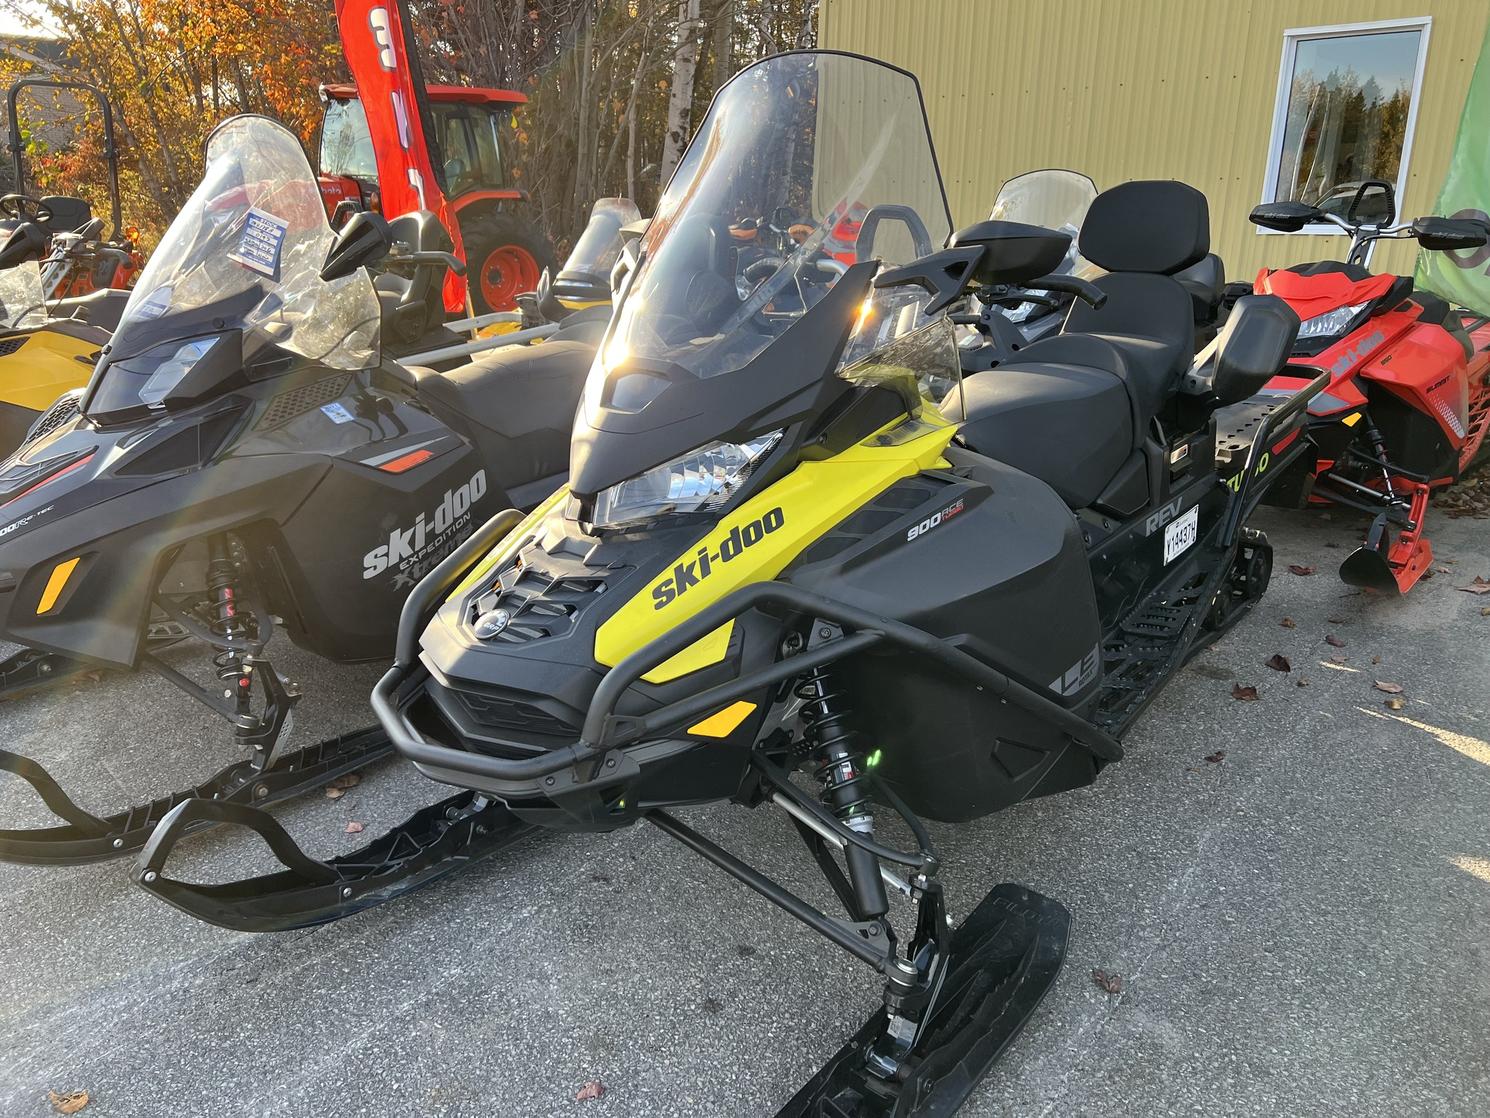 2020 Ski-Doo Expedition 20 pouces 900 ace turbo